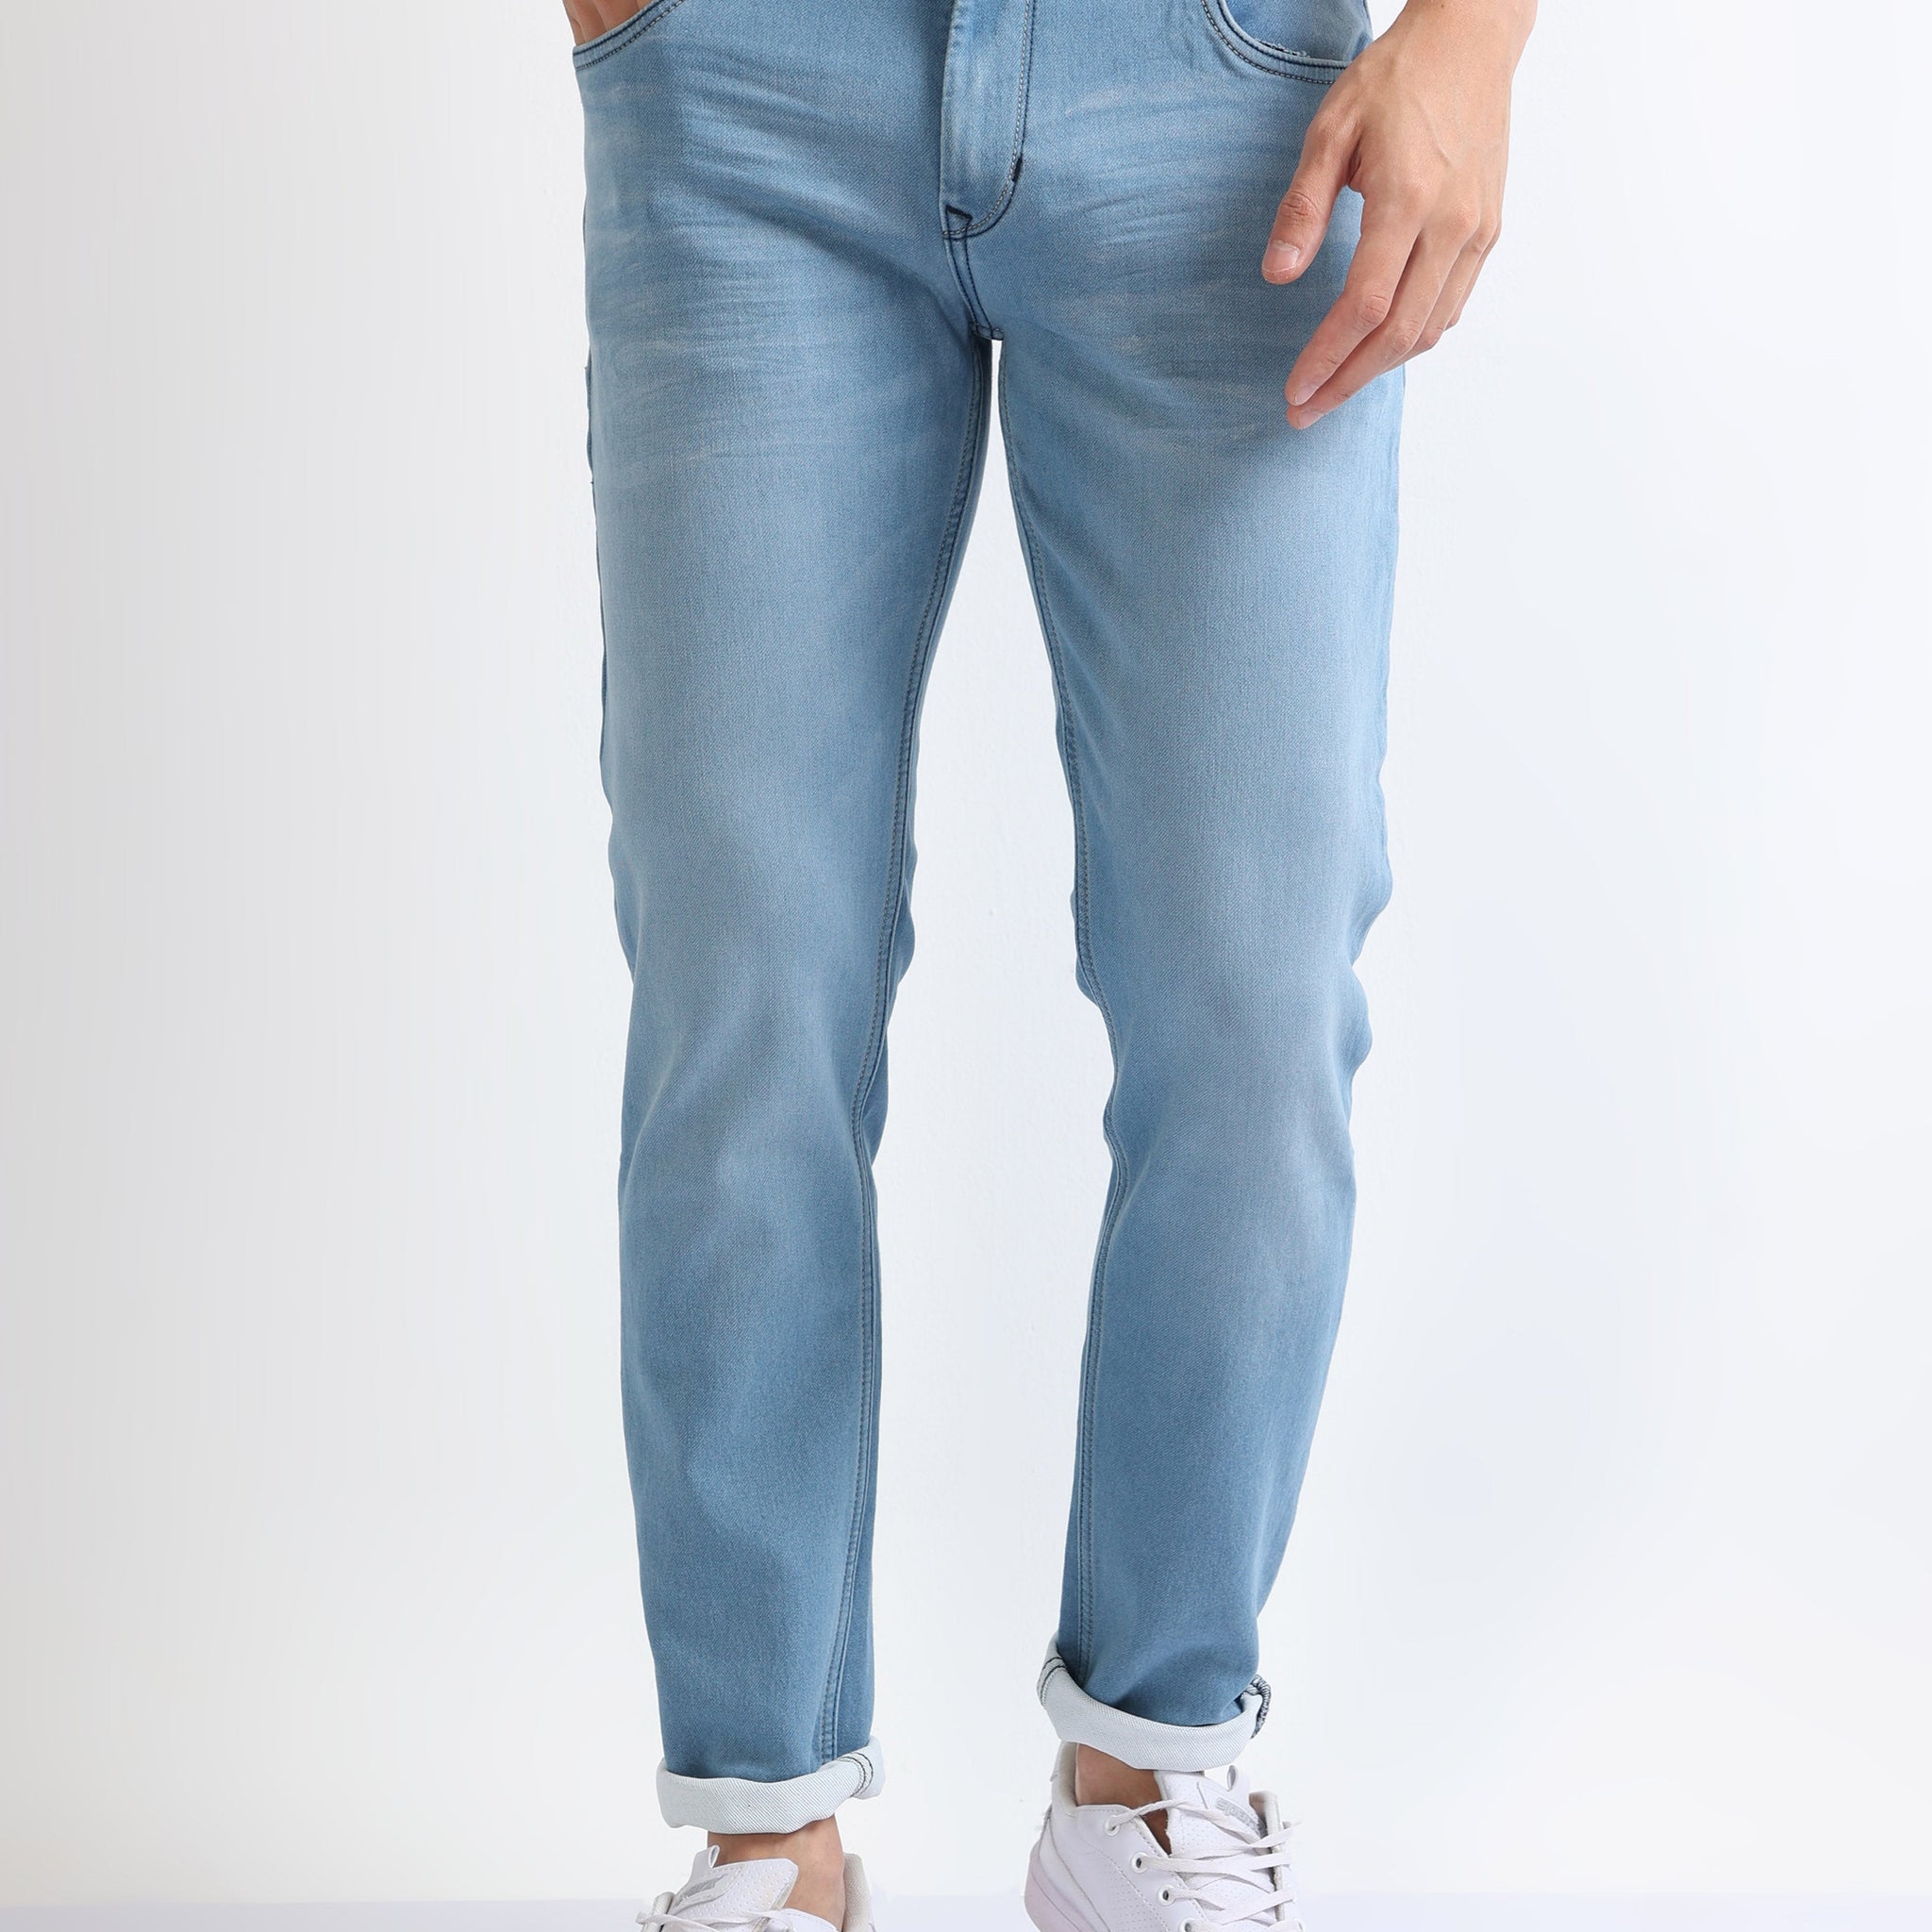 Light Wash Washed Double Shade Men's Denim Jeans